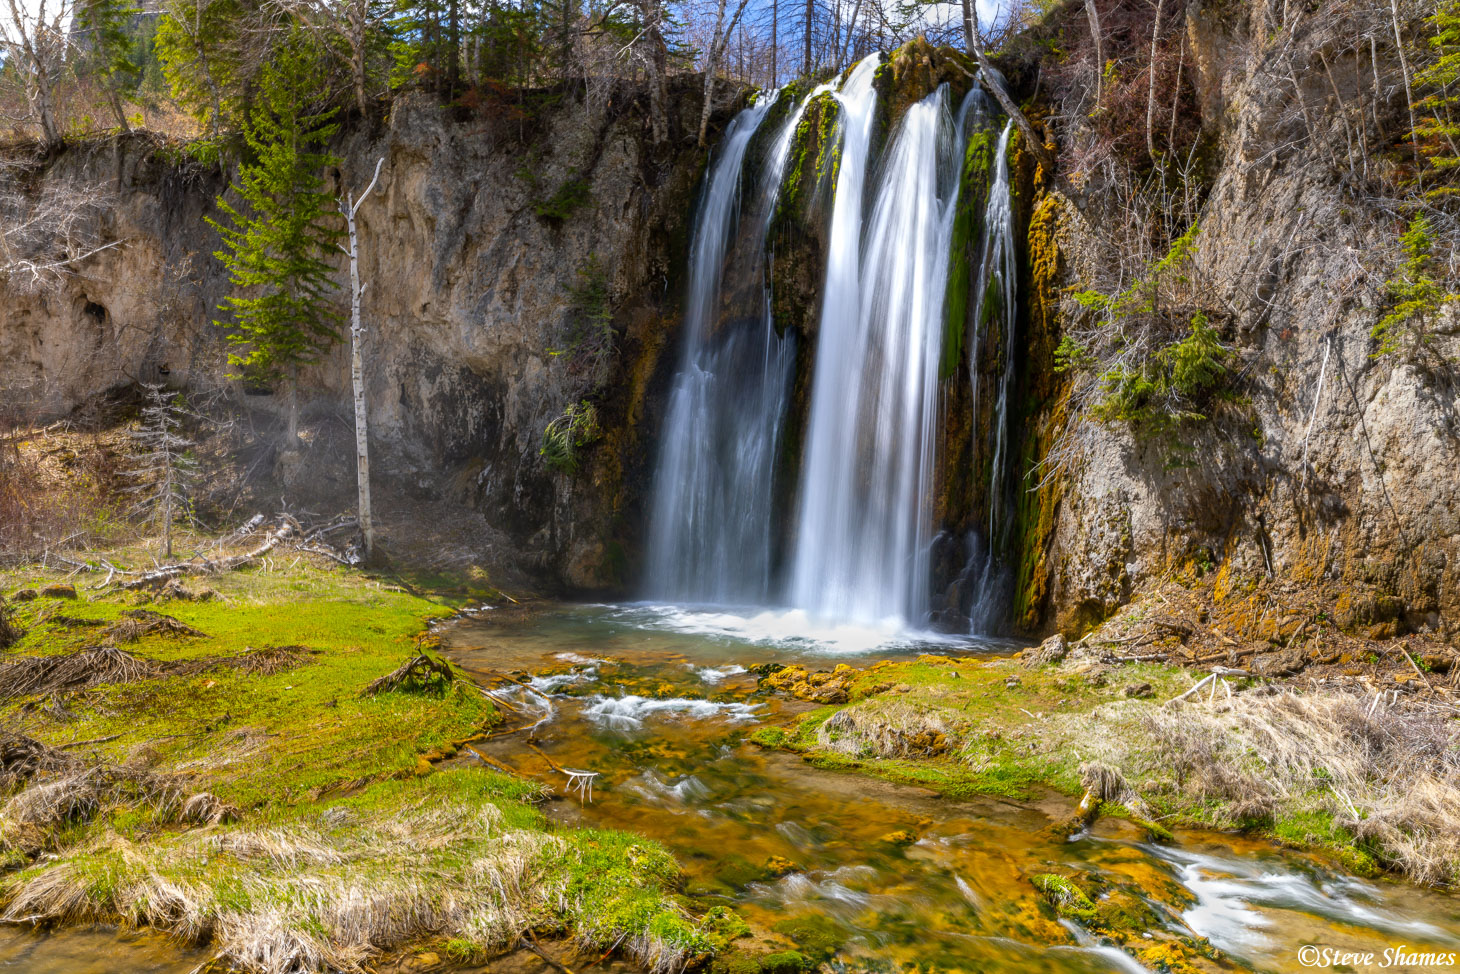 Here is Spearfish Falls, one of several great waterfalls in the Black Hills.